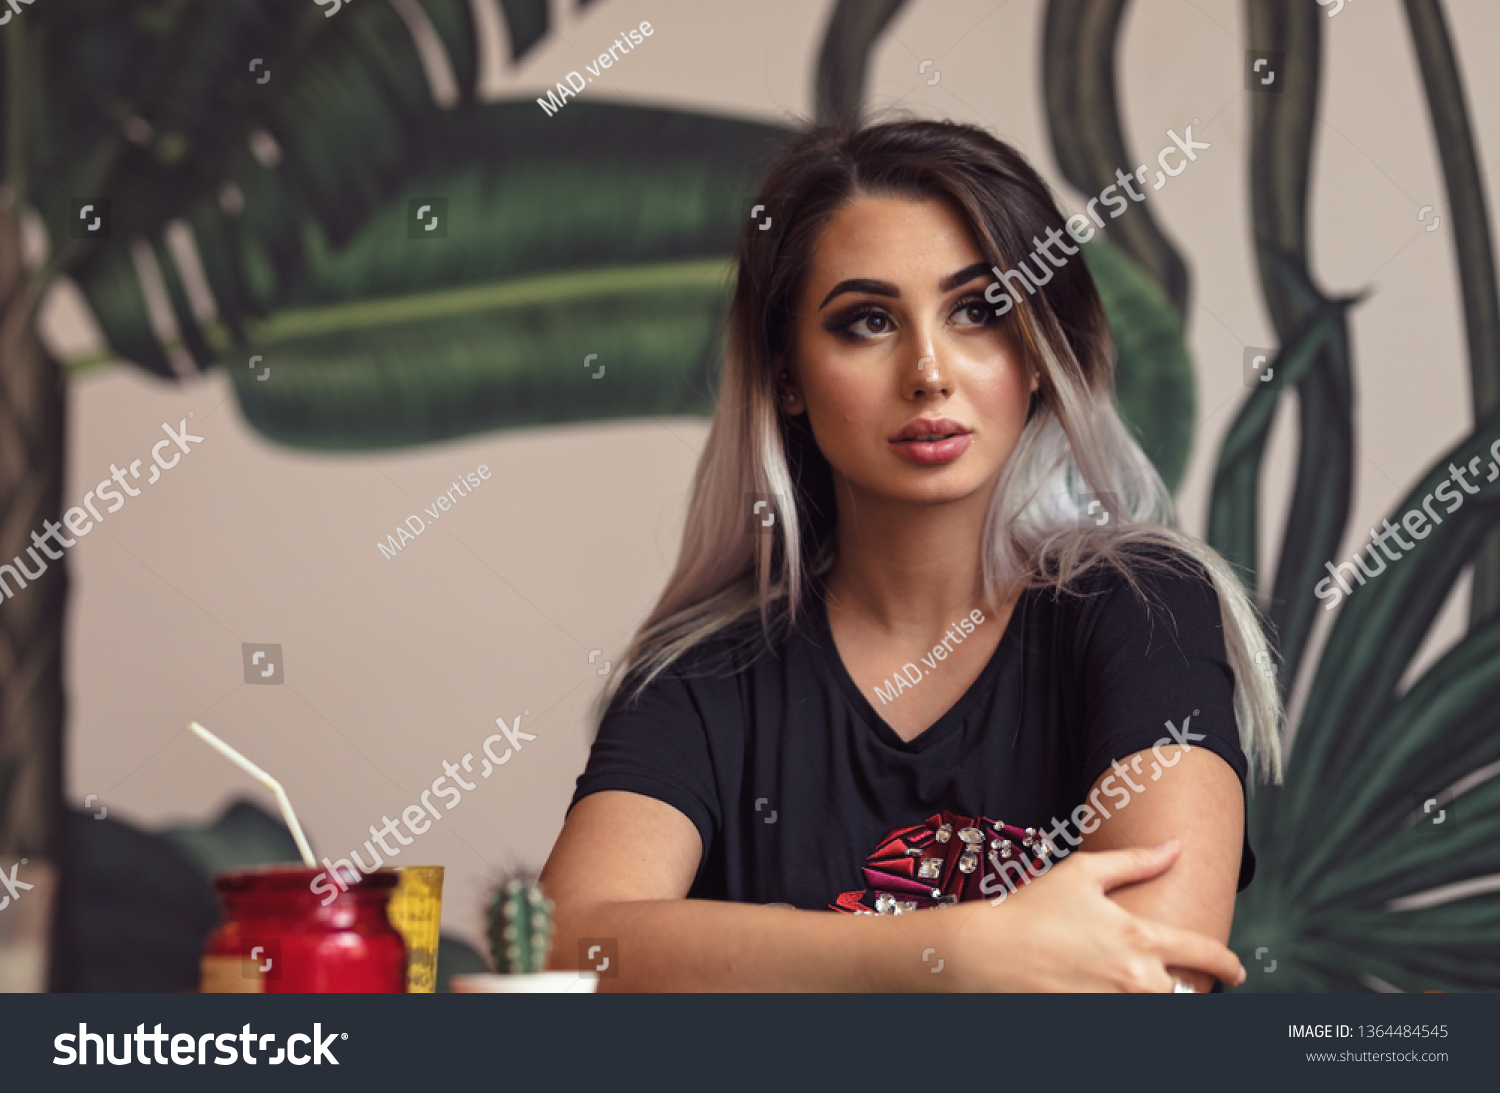 Beautiful girl waiting for best friend in a casual cafe with stylish design drinking orange juice #1364484545